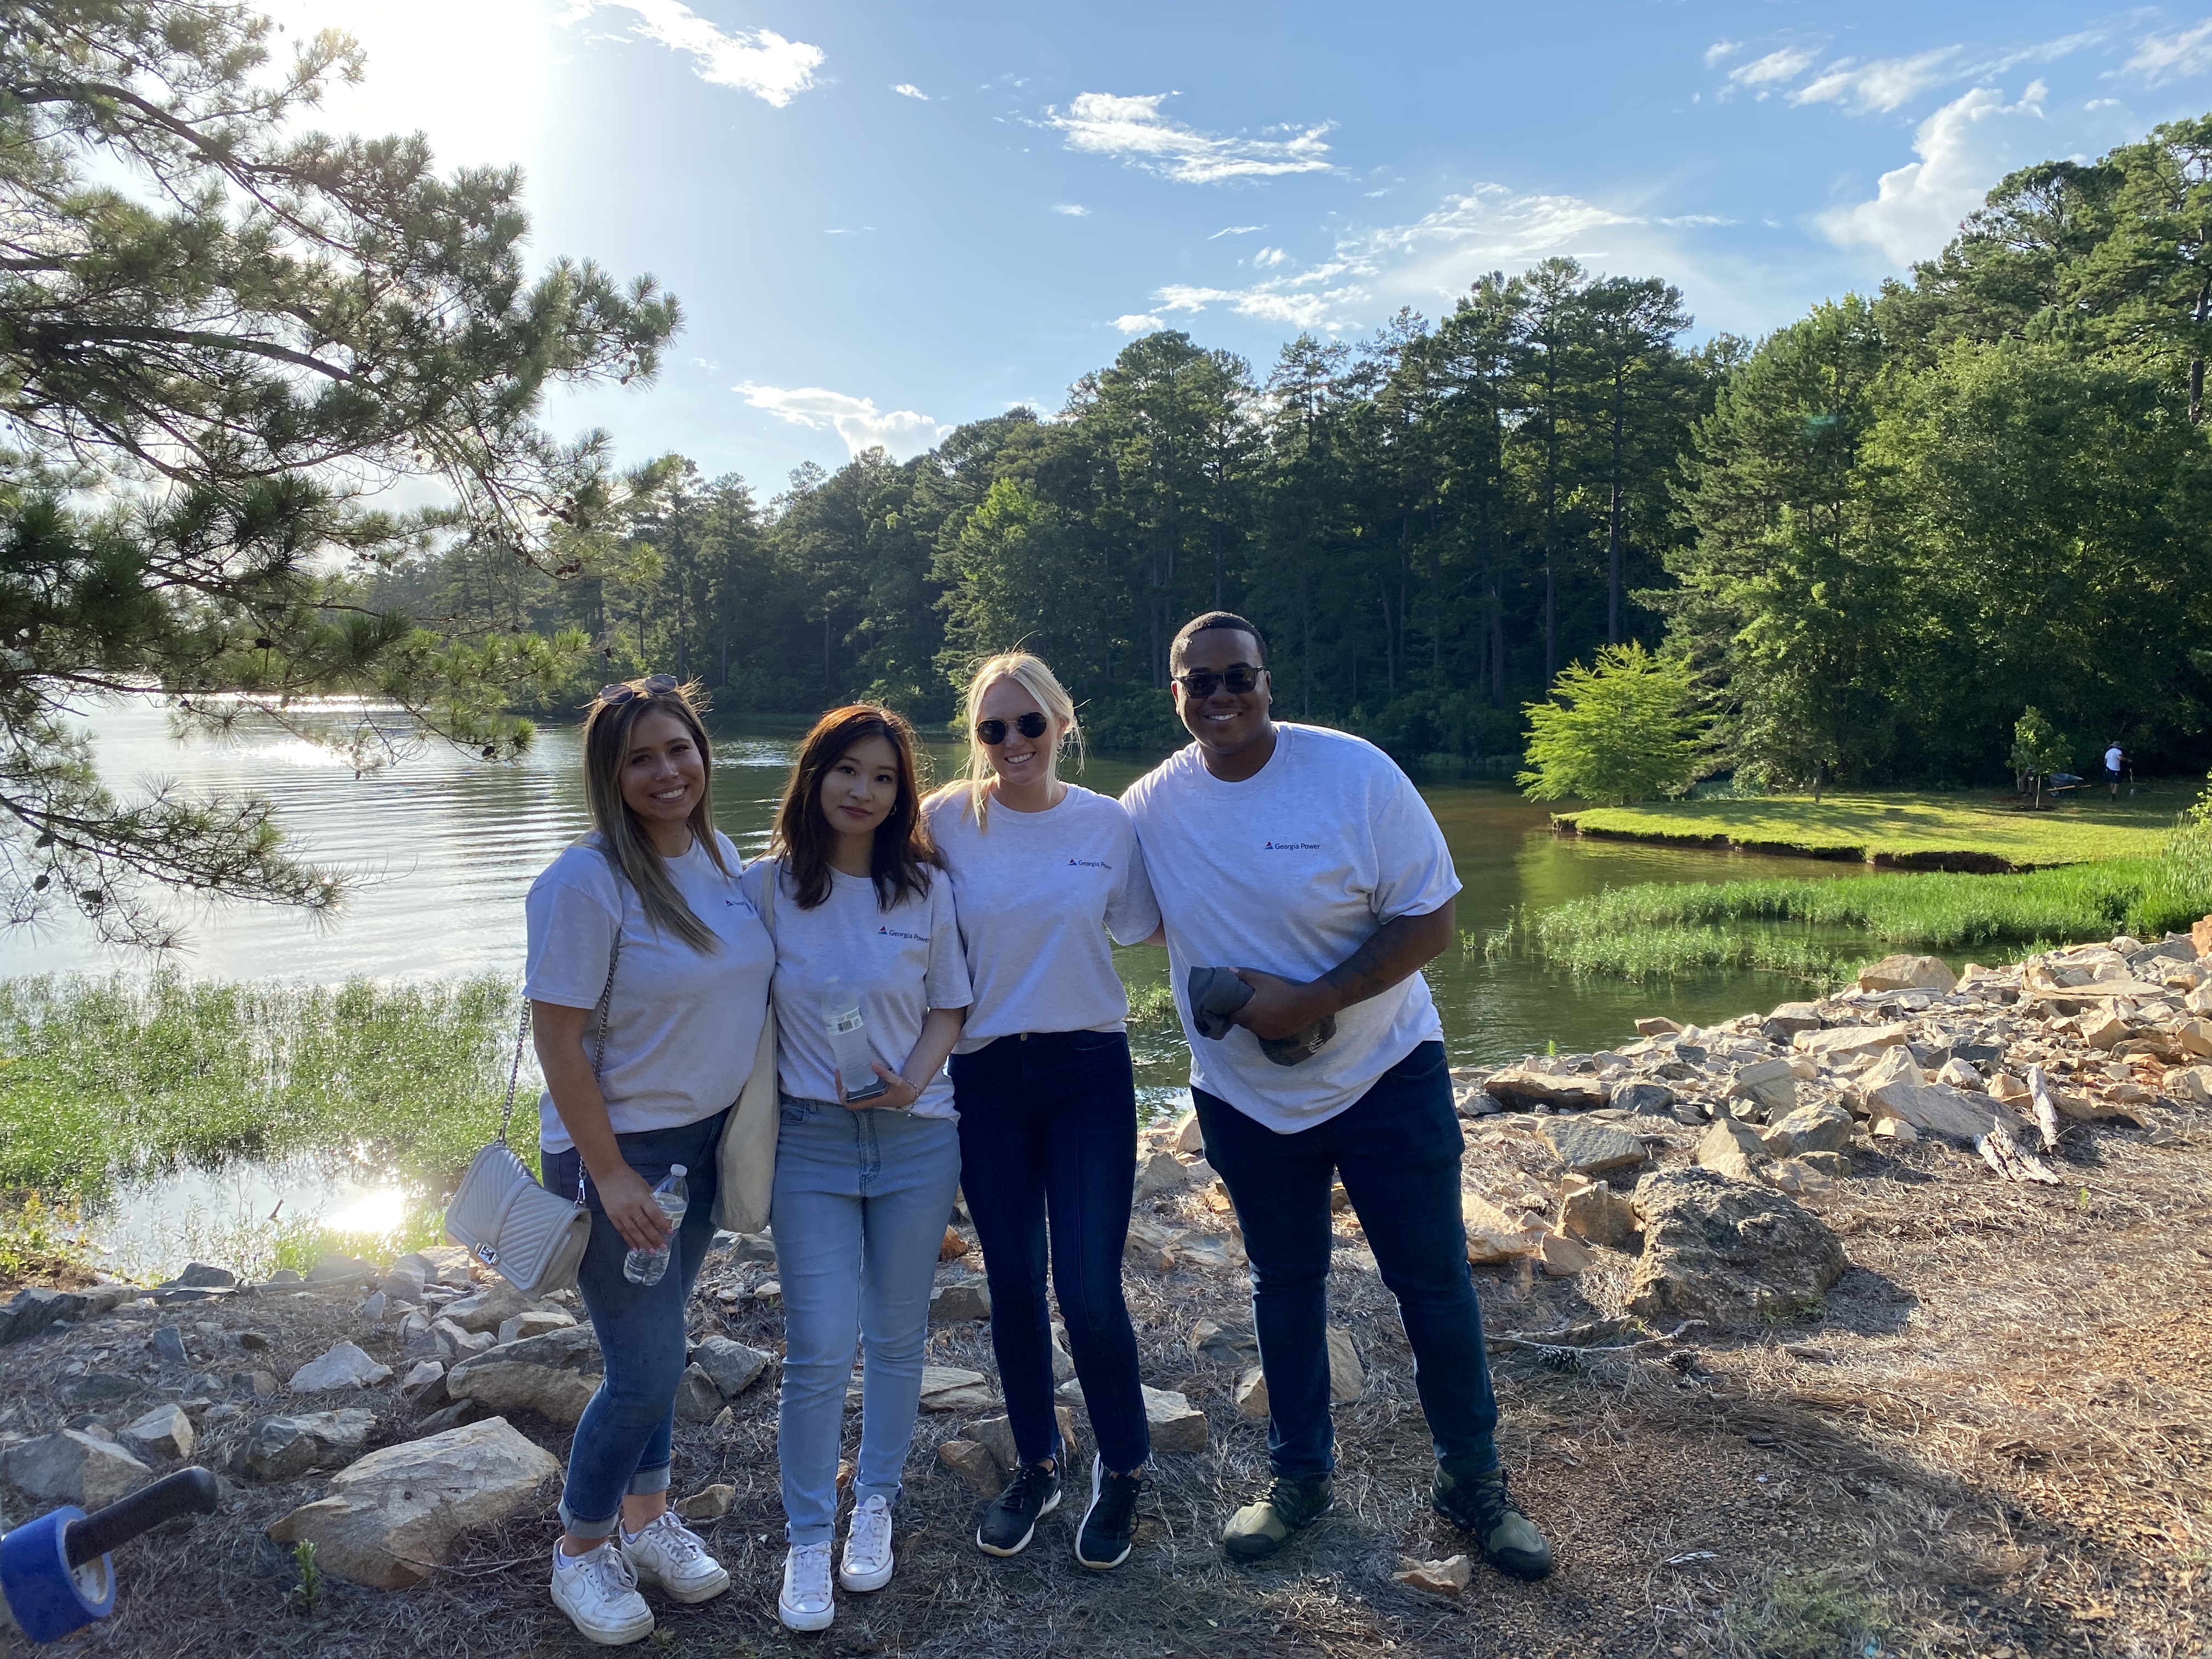 Drake and the other interns standing in front of a lake in white t-shirts under blue sunny skies